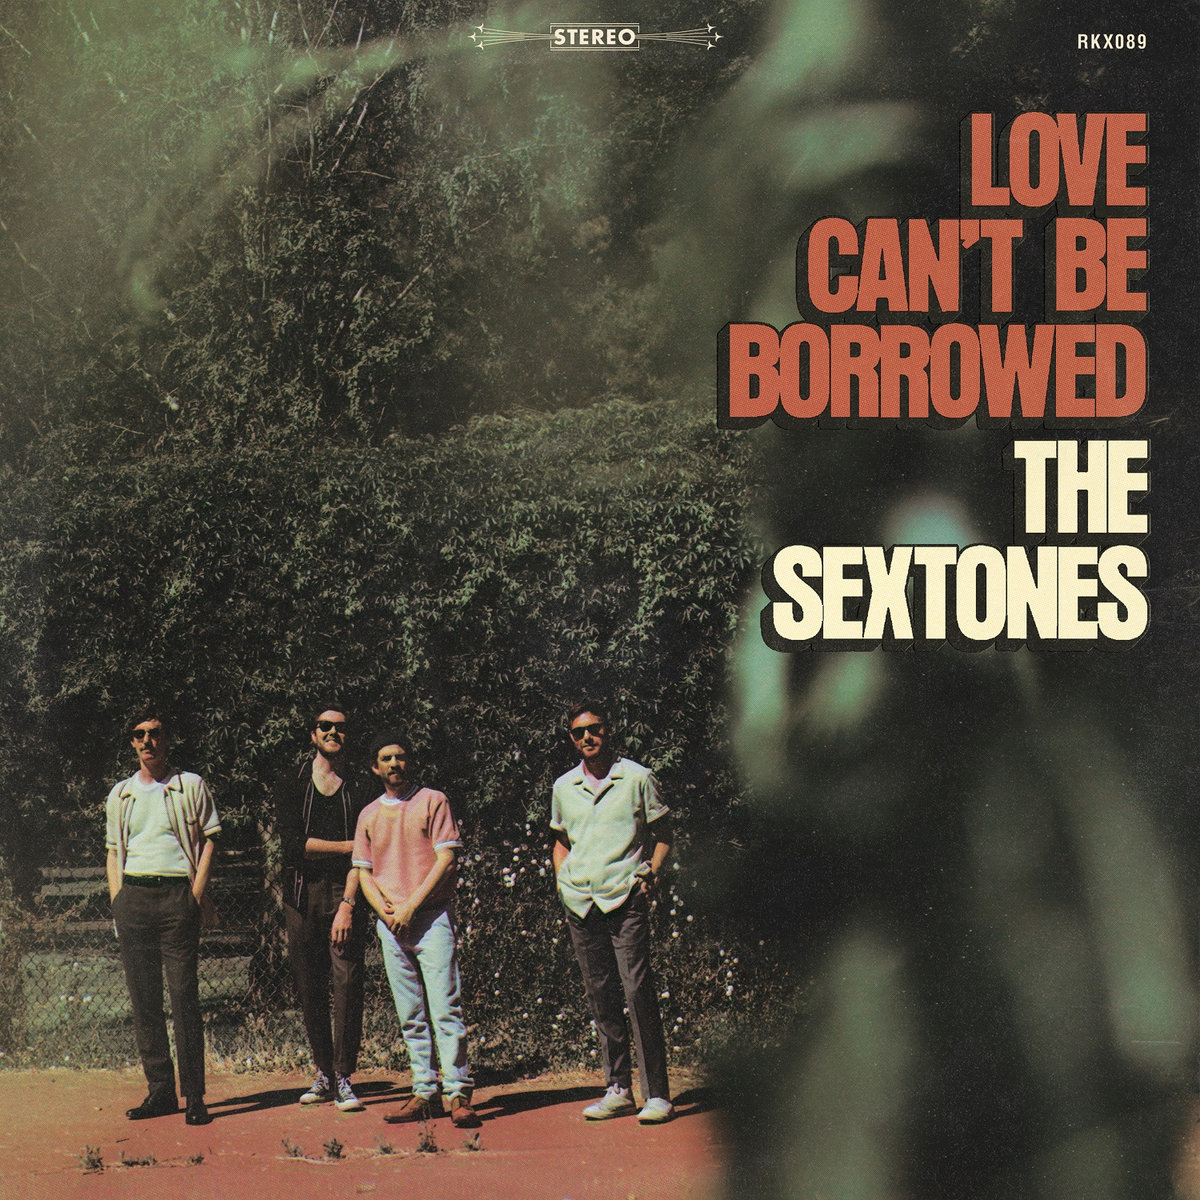 The Sextones – Love Can’t Be Borrowed